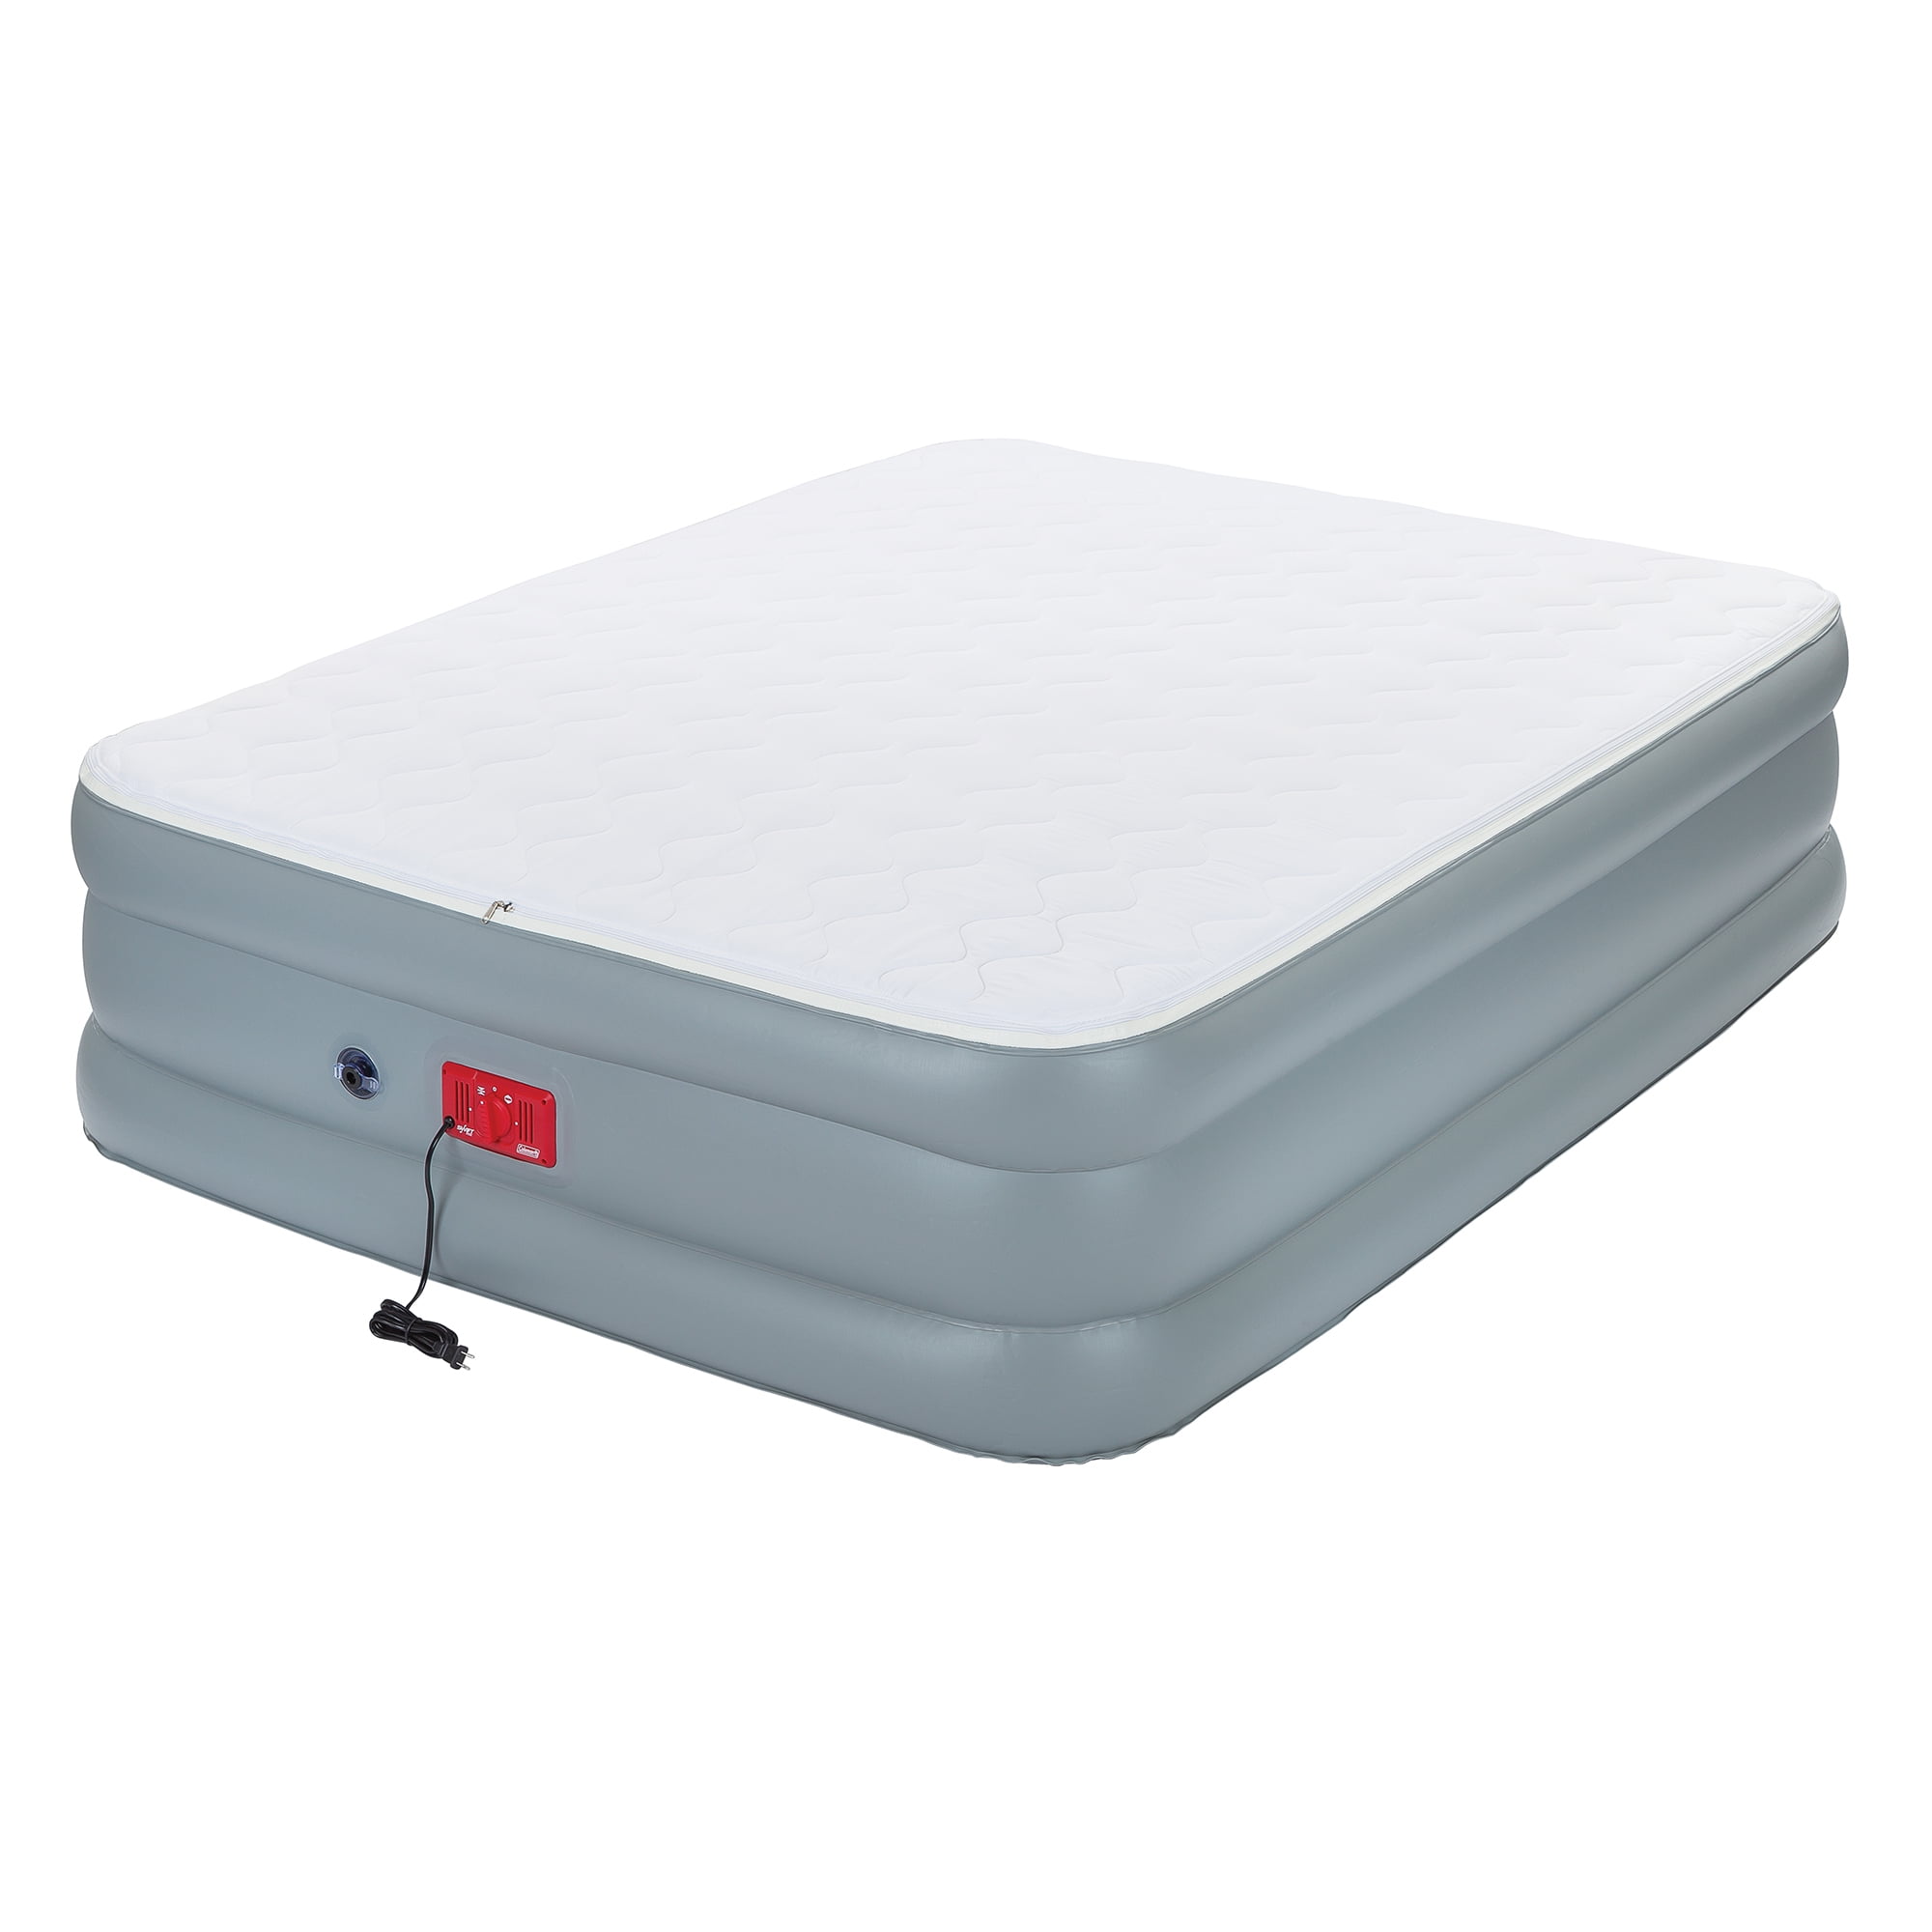 9.5 inches high Coleman Twin Air Mattress with built in Pump